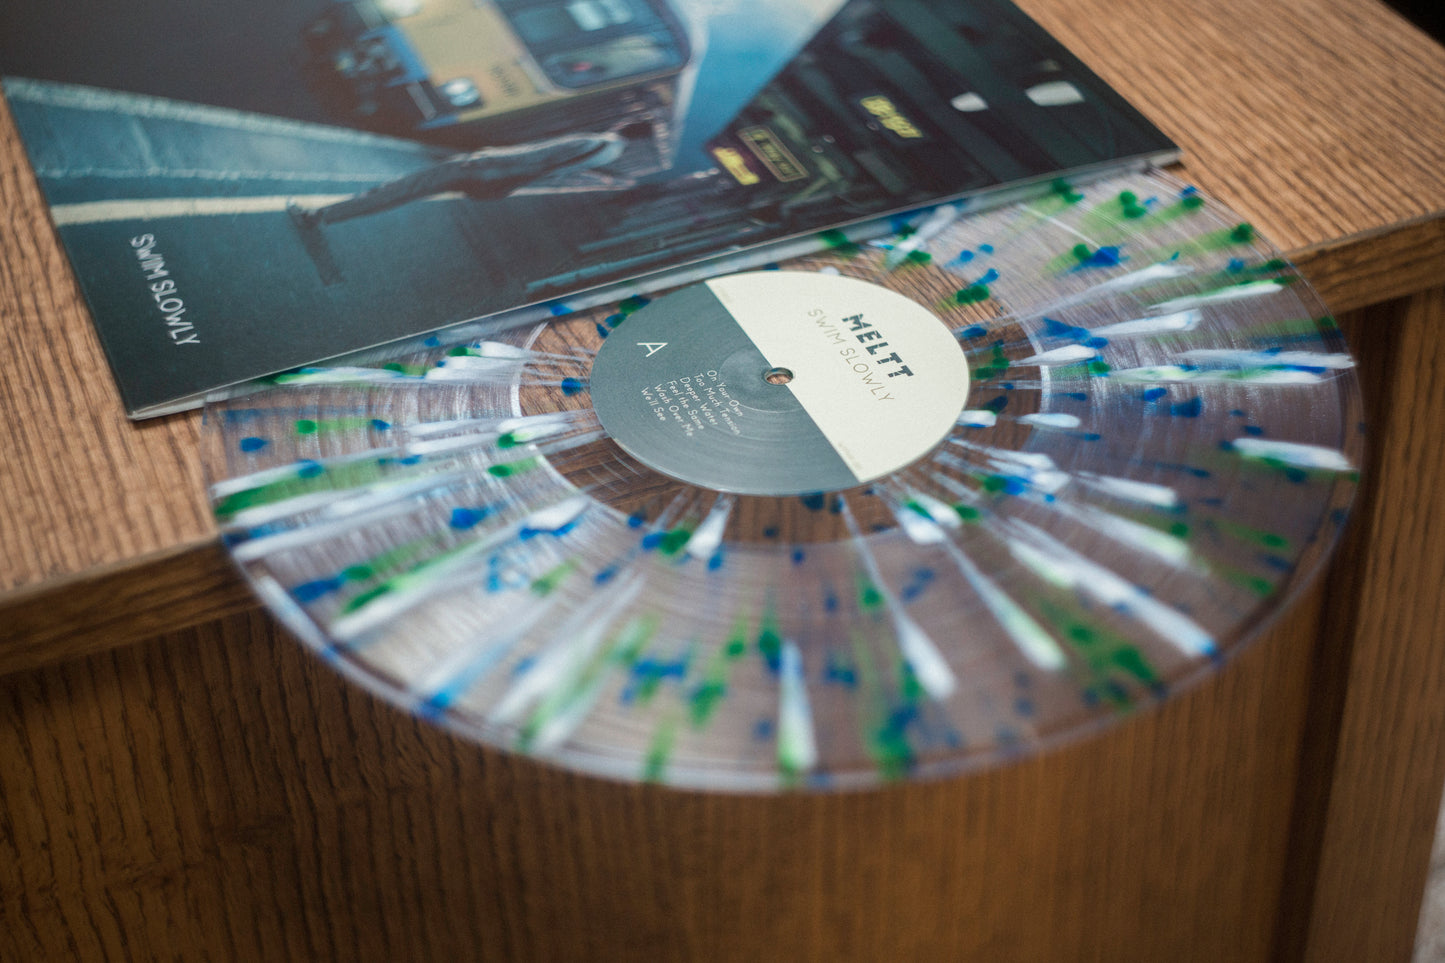 4th Press Limited Edition 12" Clear+White+Blue+Green Splatter Vinyl